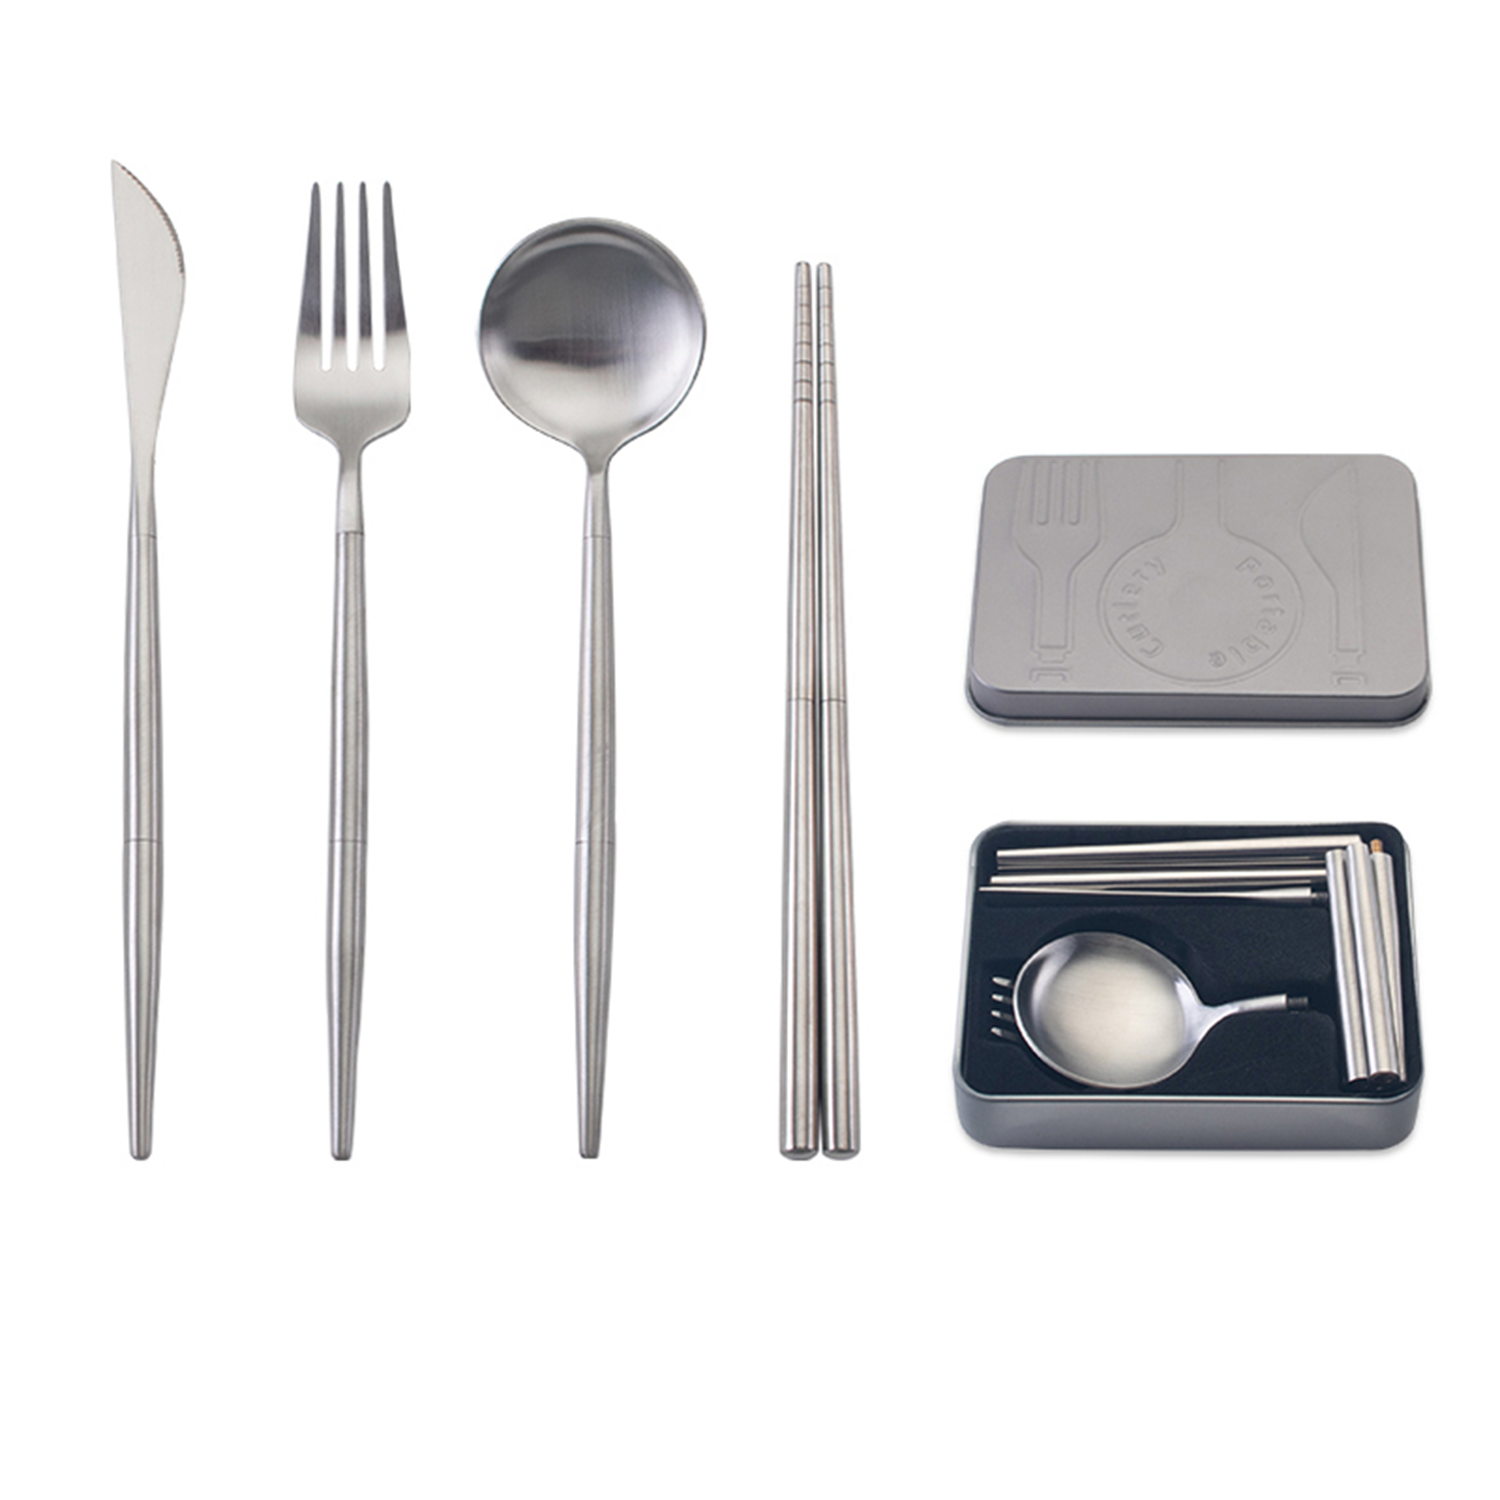 Outlery - Collapsible Cutlery & Chopsticks That Fit In Your Pocket